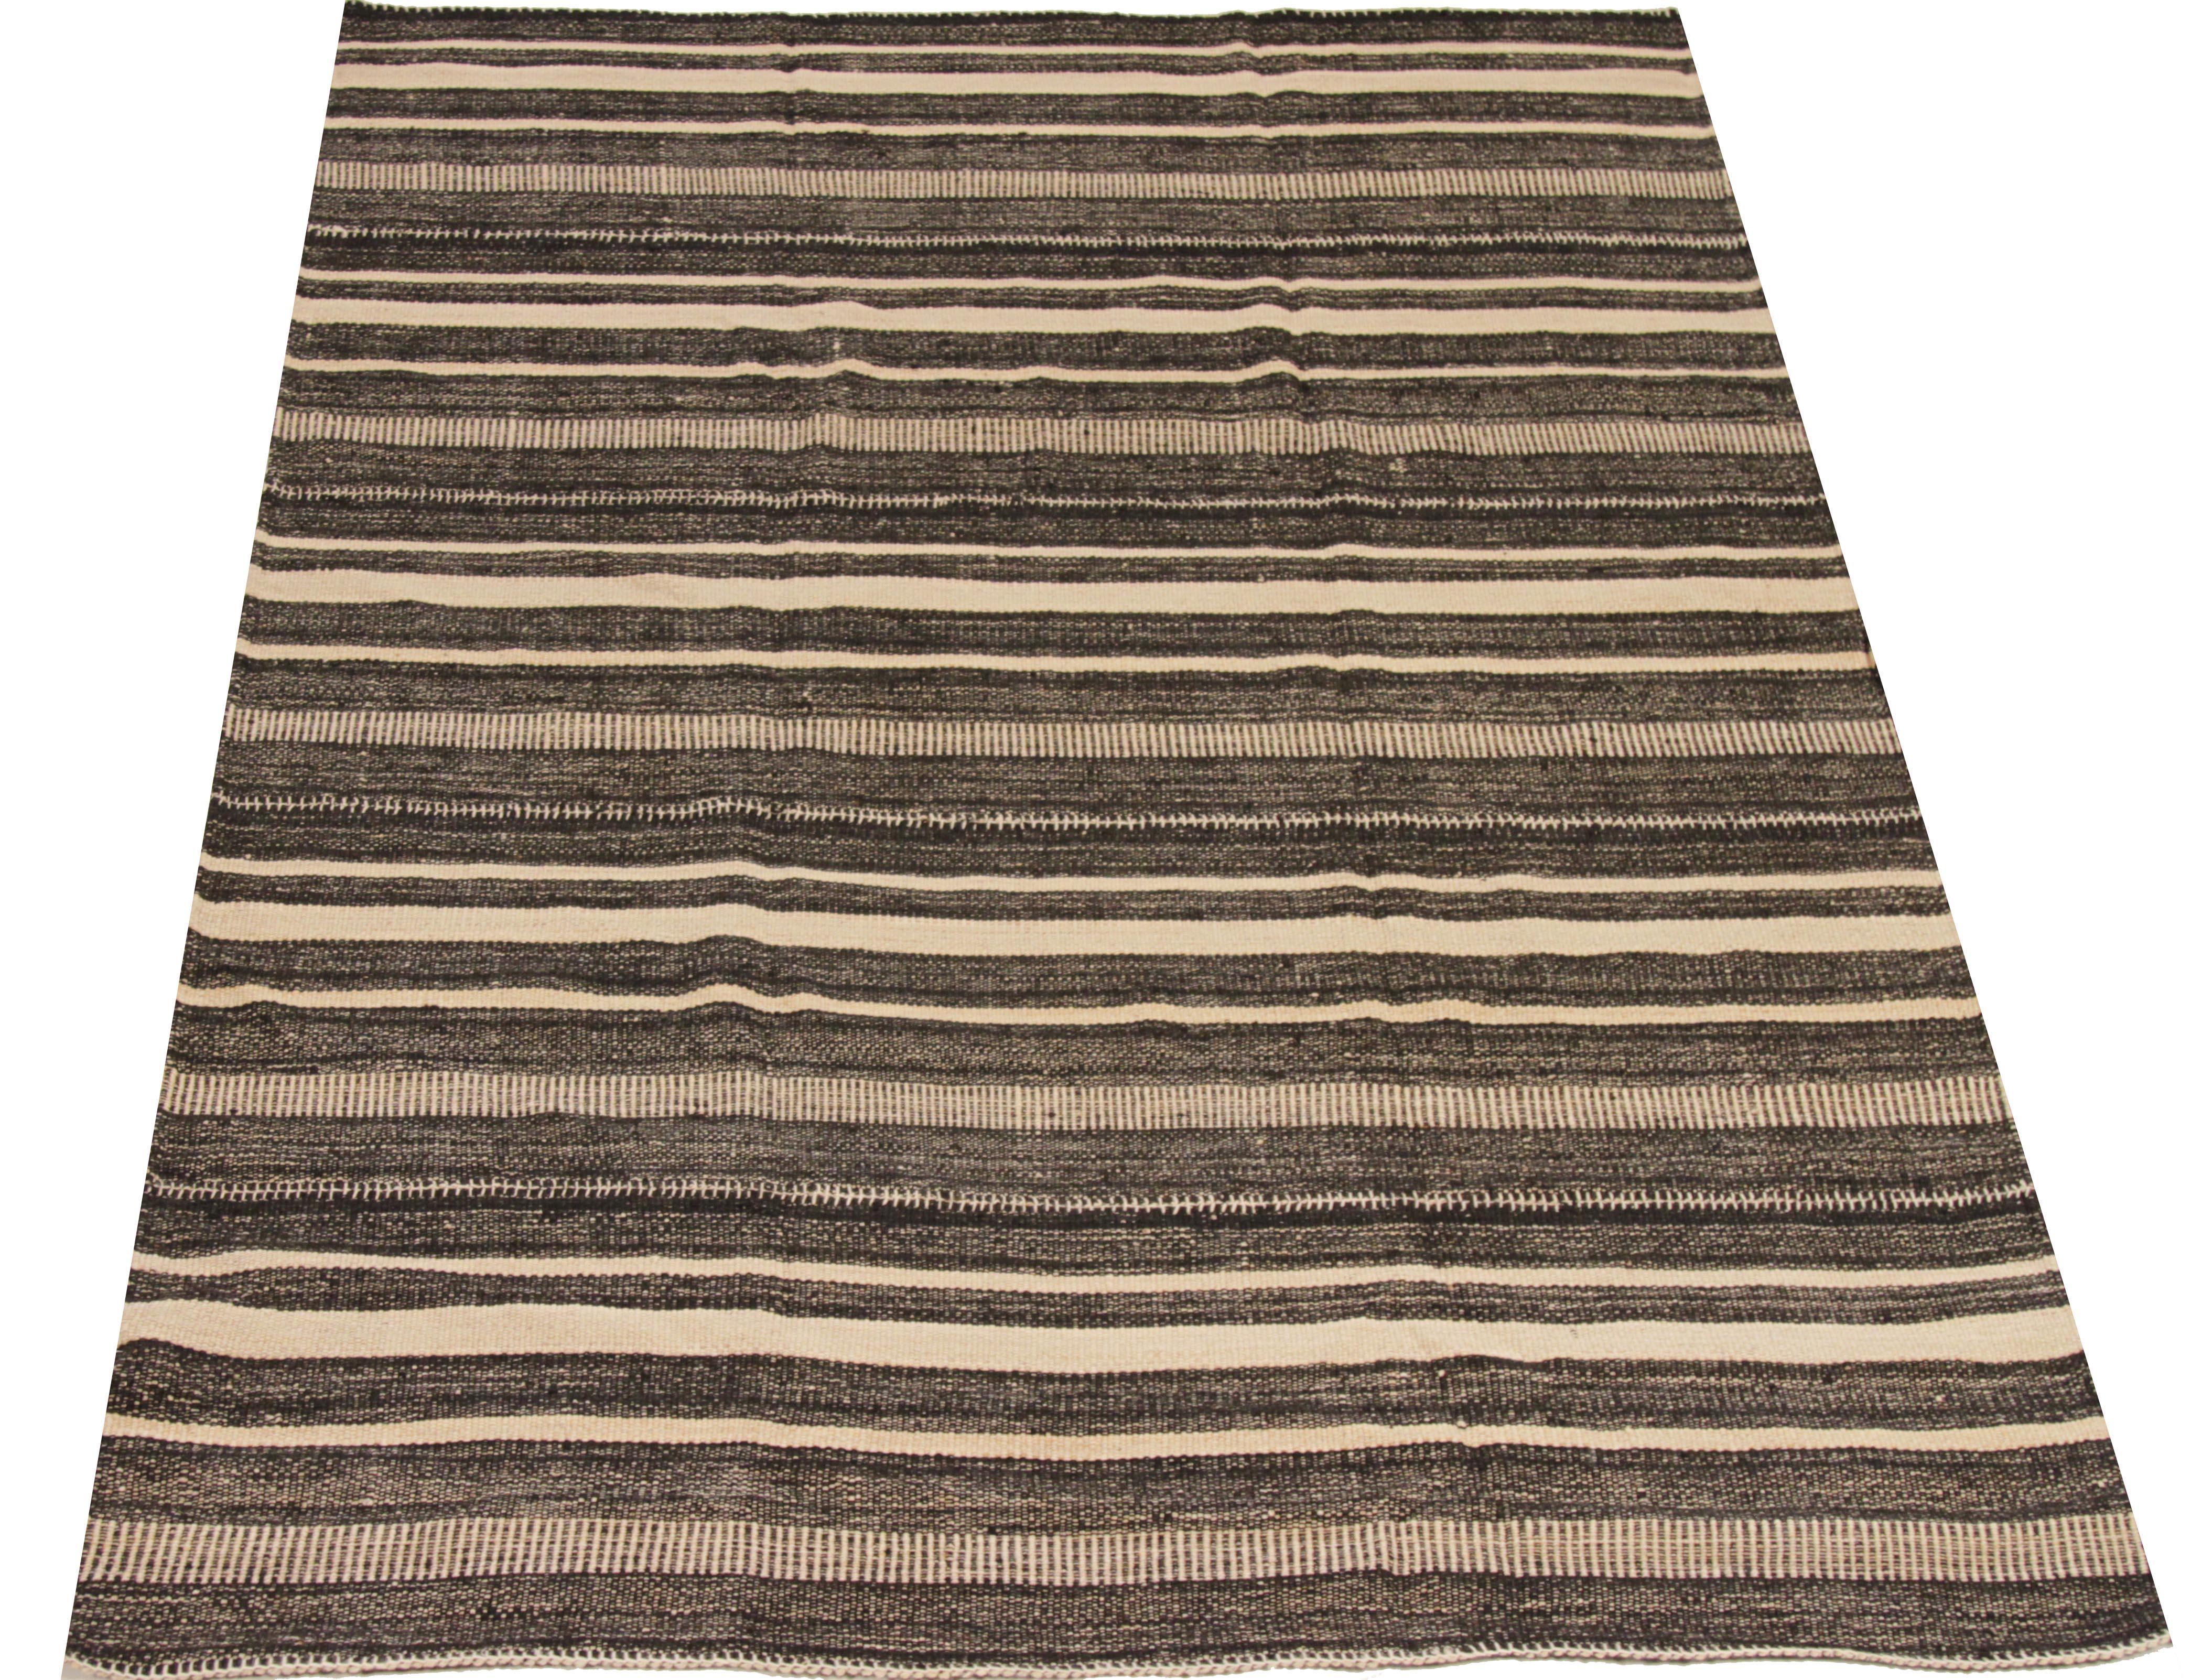 Persian rug handwoven from the finest sheep’s wool and colored with all-natural vegetable dyes that are safe for humans and pets. It’s a traditional Kilim flat-weave design featuring an exquisite ivory field with alternating black and brown stripes.